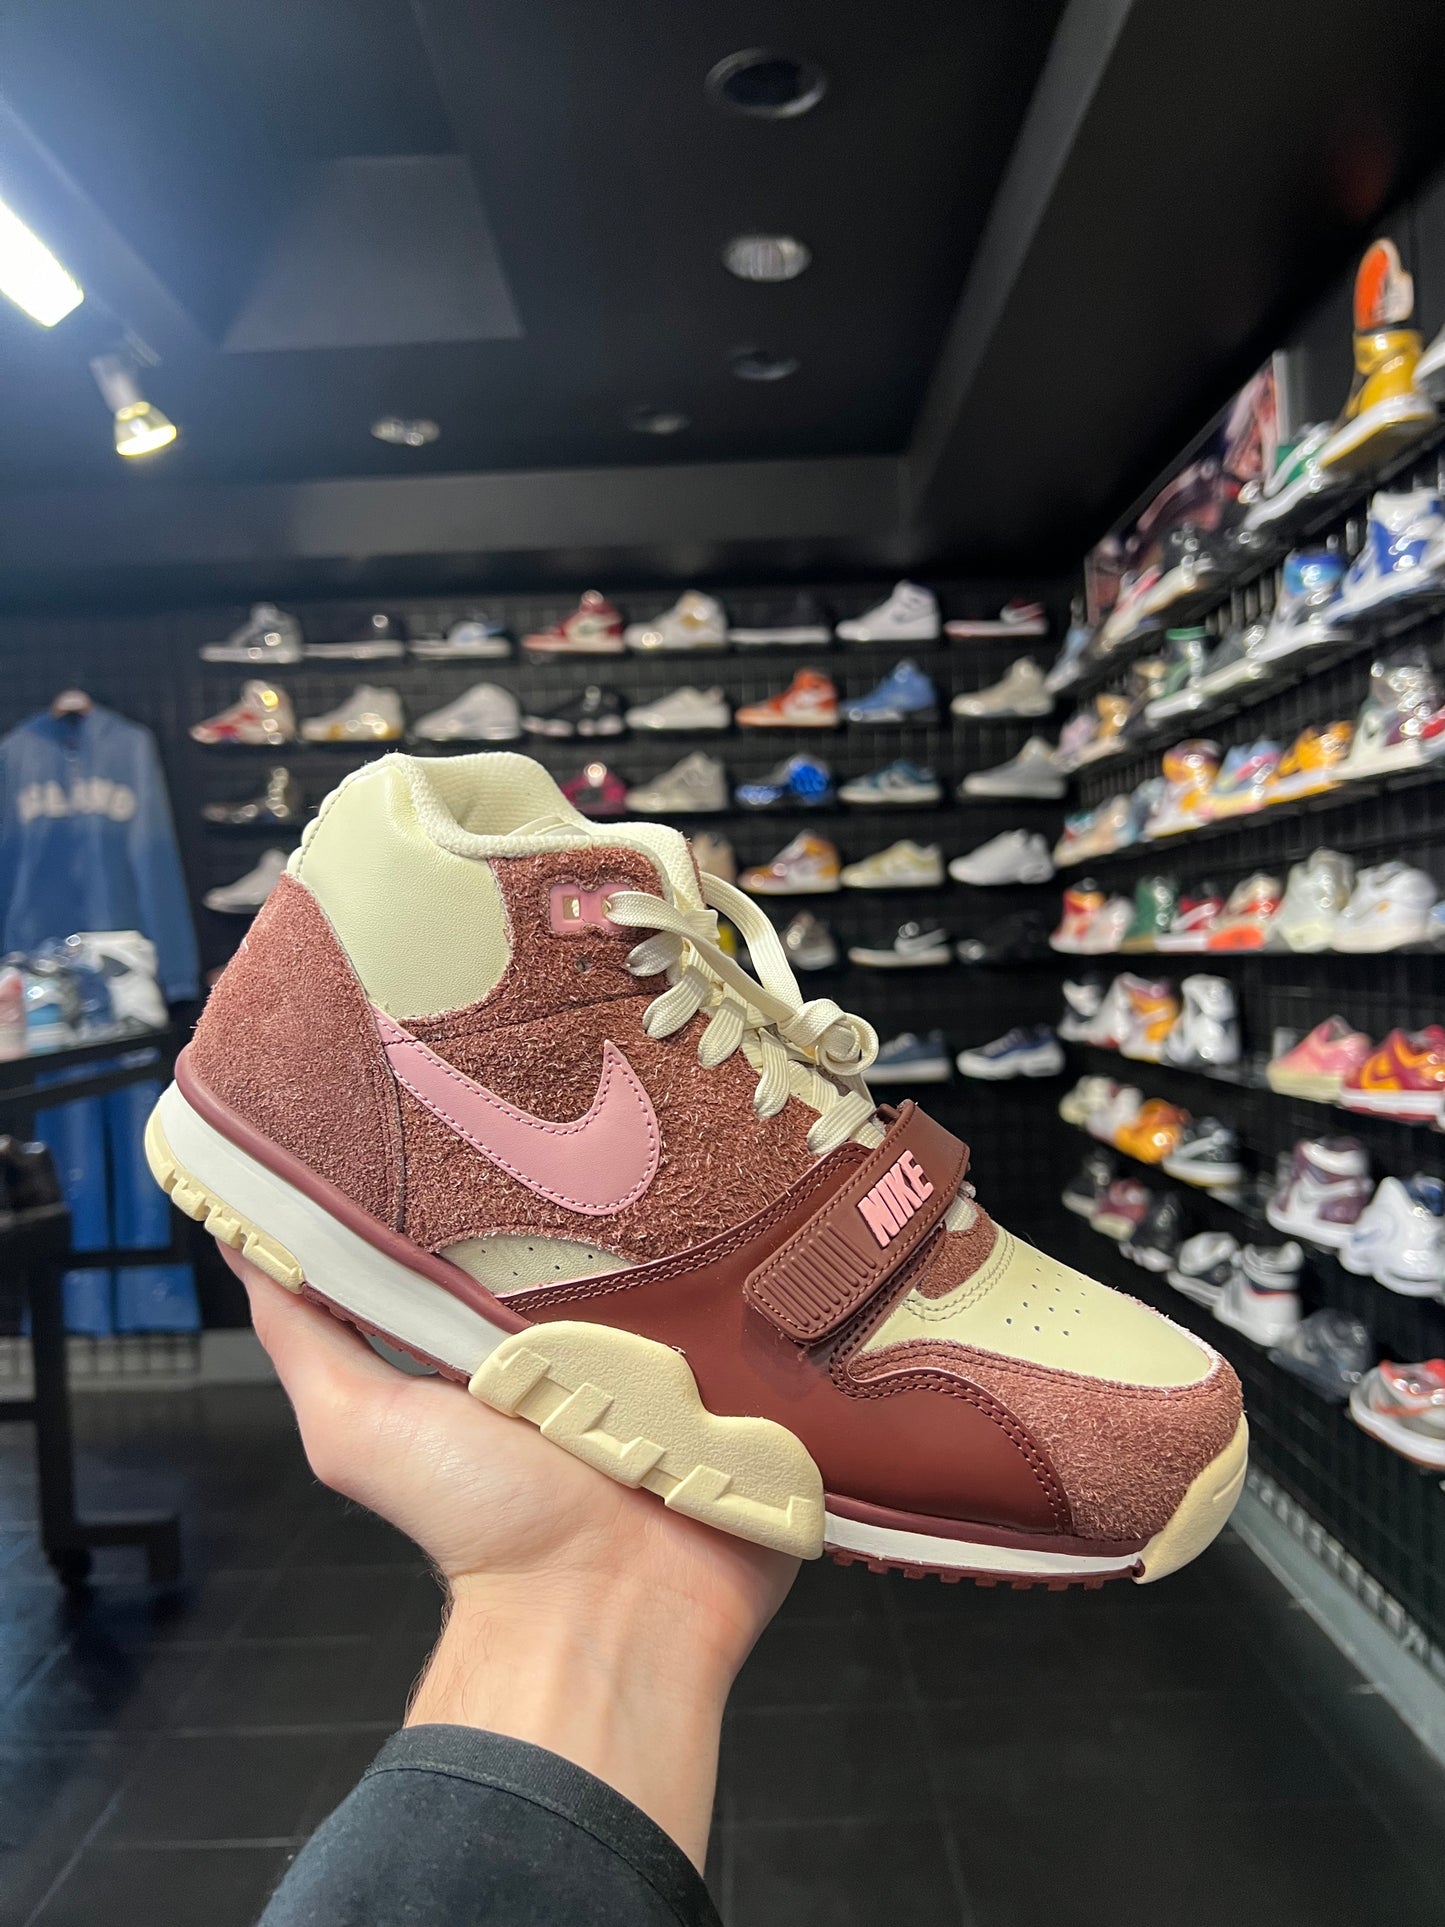 Men’s Nike Air Trainer Bacon Brand New